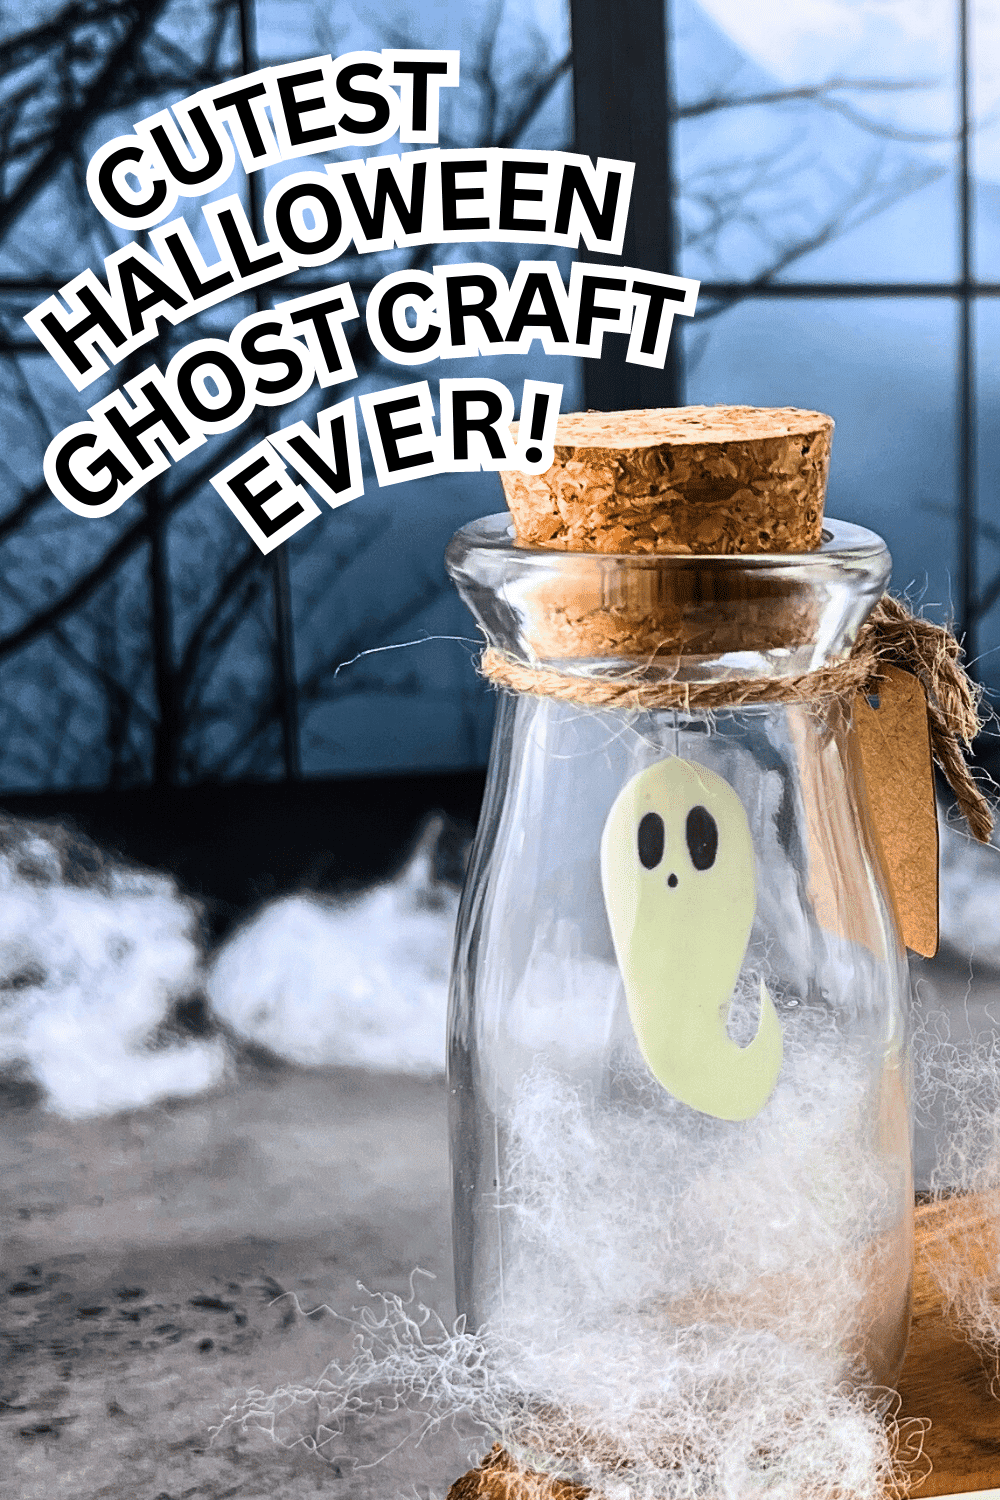 Cute Halloween Party Favor or Fun Halloween Decoration Ideas paper ghost floating in a small jar